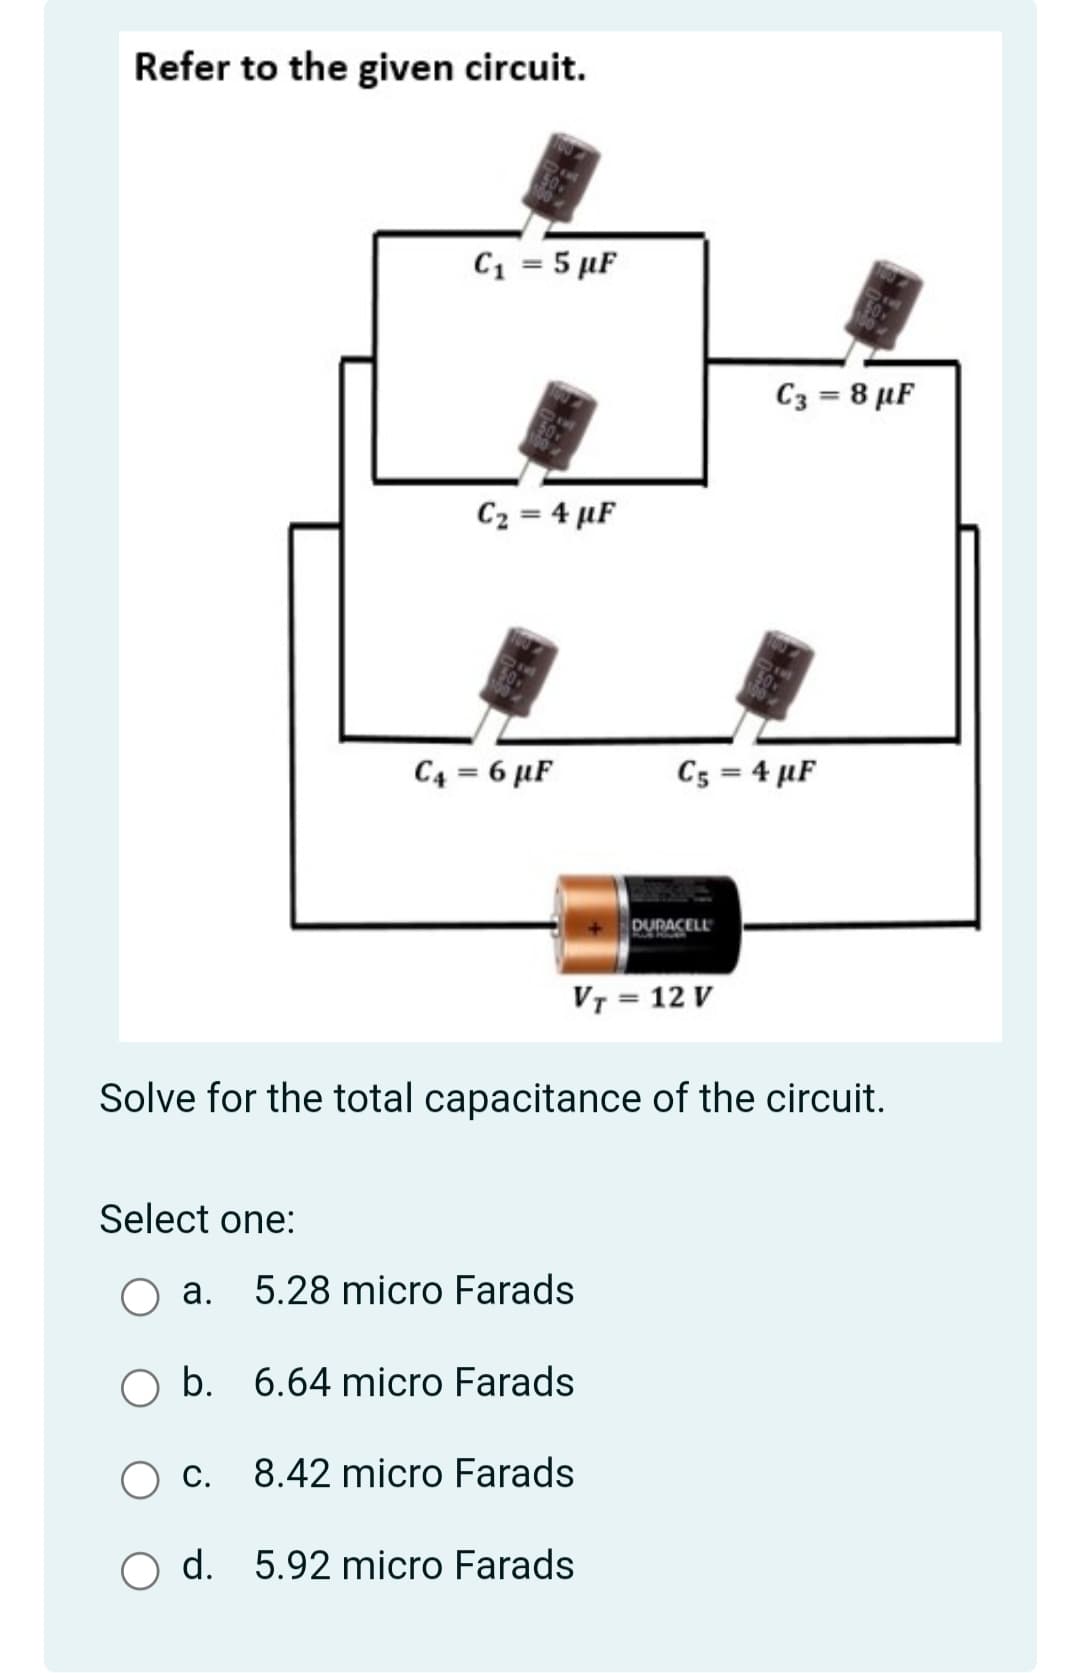 Refer to the given circuit.
C1 = 5 µF
C3 = 8 µF
C2 = 4 µF
C4 = 6 µF
Cs = 4 µF
DURACELL
VT = 12 V
Solve for the total capacitance of the circuit.
Select one:
а.
5.28 micro Farads
b. 6.64 micro Farads
С.
8.42 micro Farads
O d. 5.92 micro Farads
